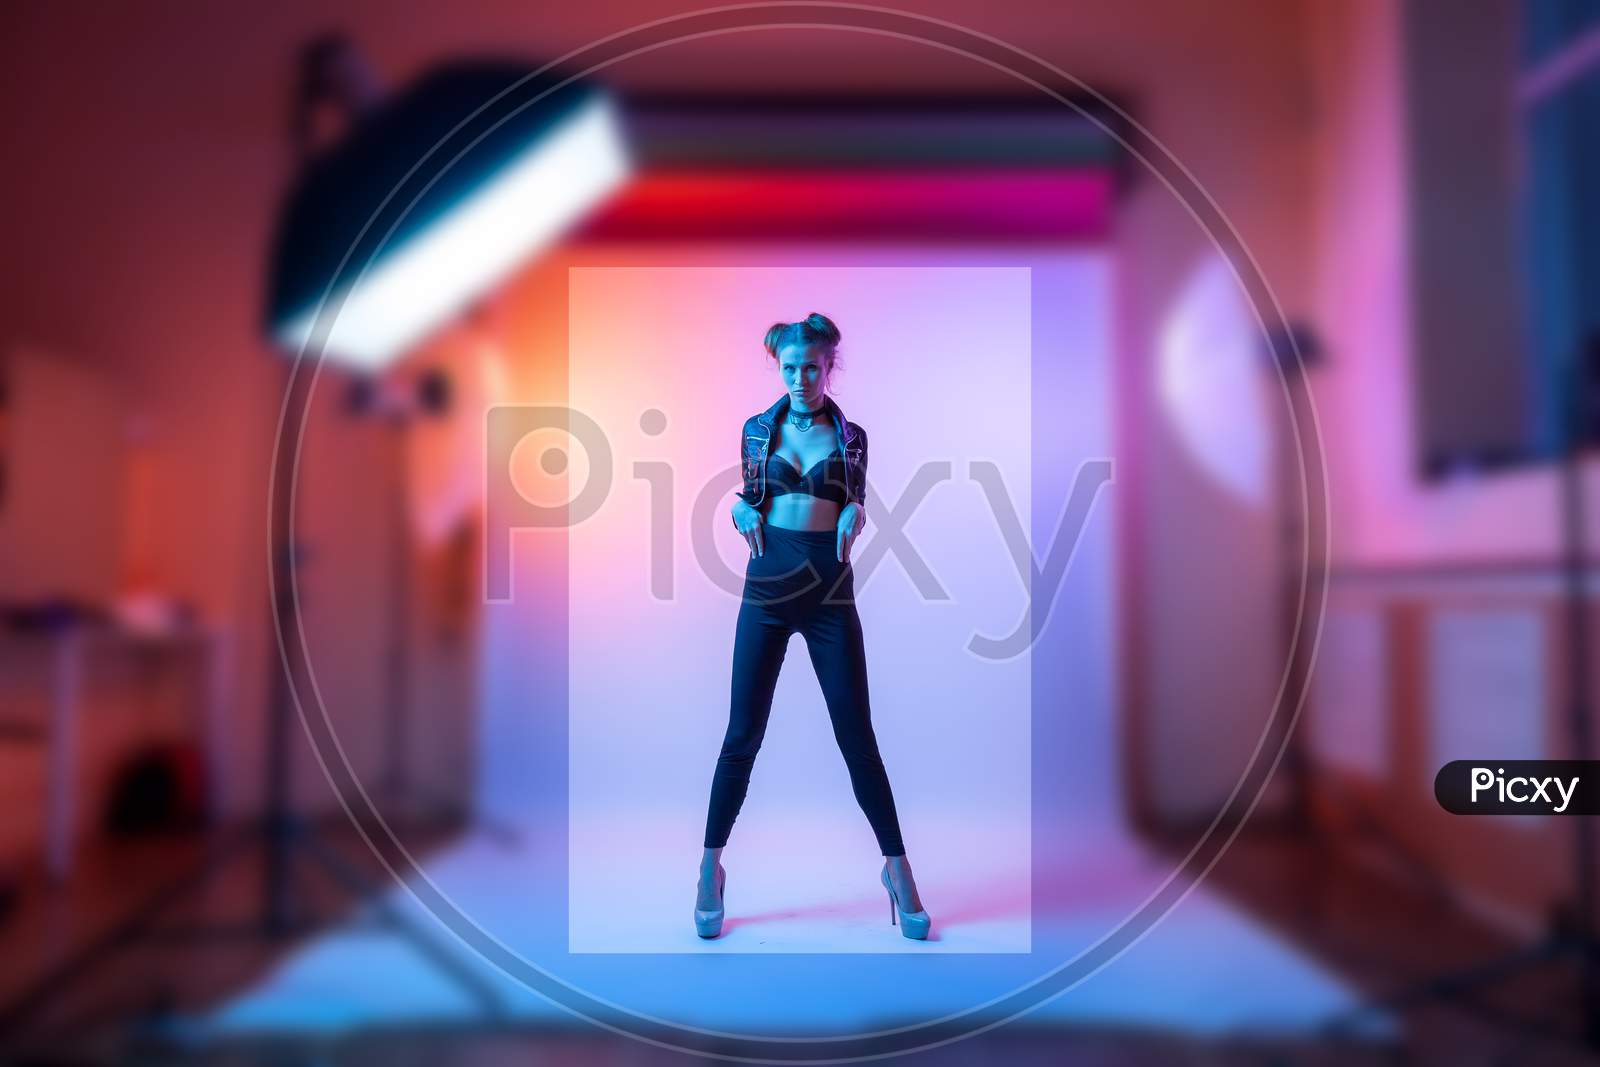 Photographing Clothes For A Catalog On A Stylish Thin Woman In A Photo Studio With Plain Colors And Bright Pink Neon Lighting. Fashion Shooting Concept For A Clothing Store.